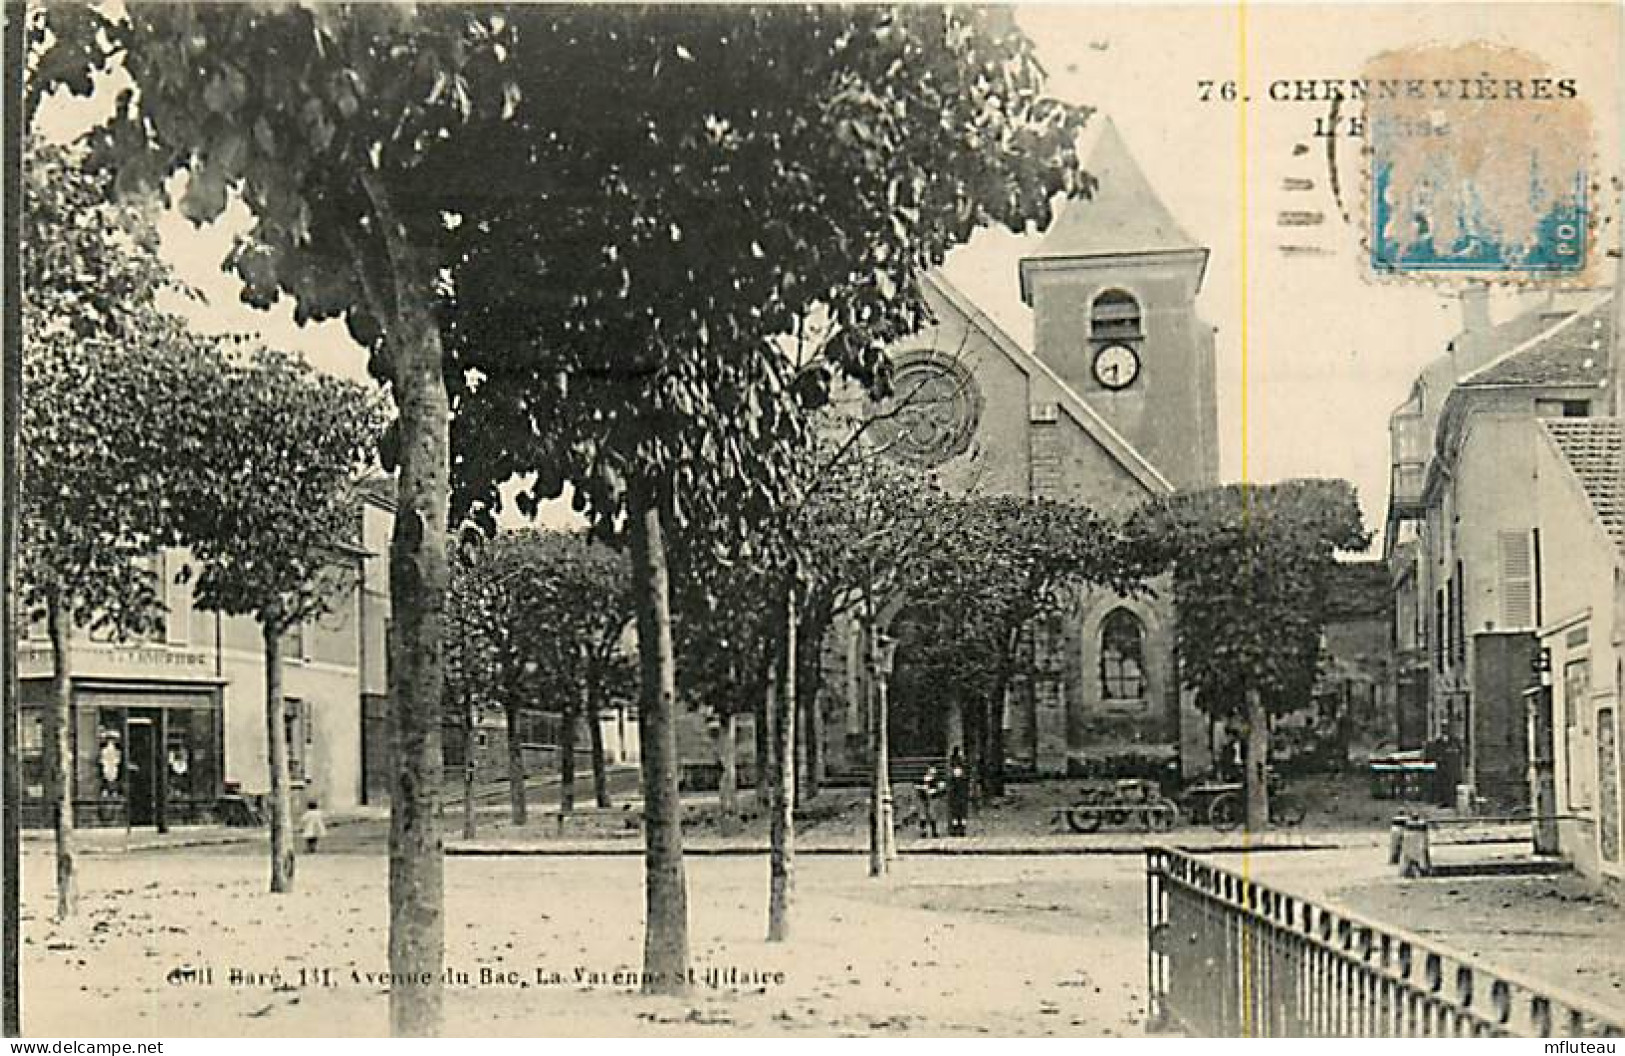 94* CHENNEVIERES  Eglise                MA83,0253 - Chennevieres Sur Marne